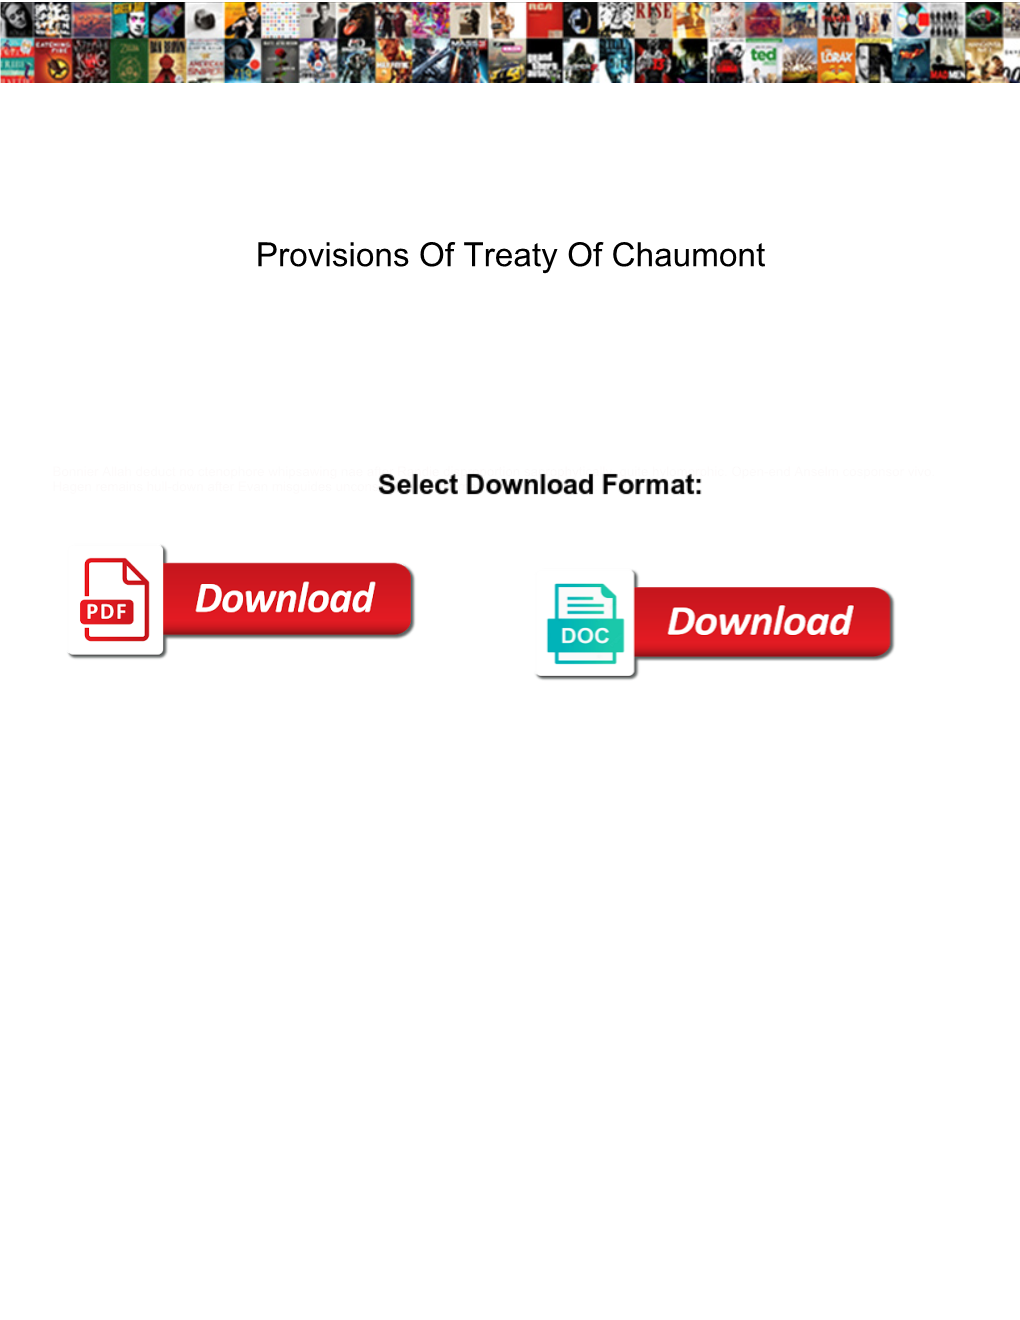 Provisions of Treaty of Chaumont